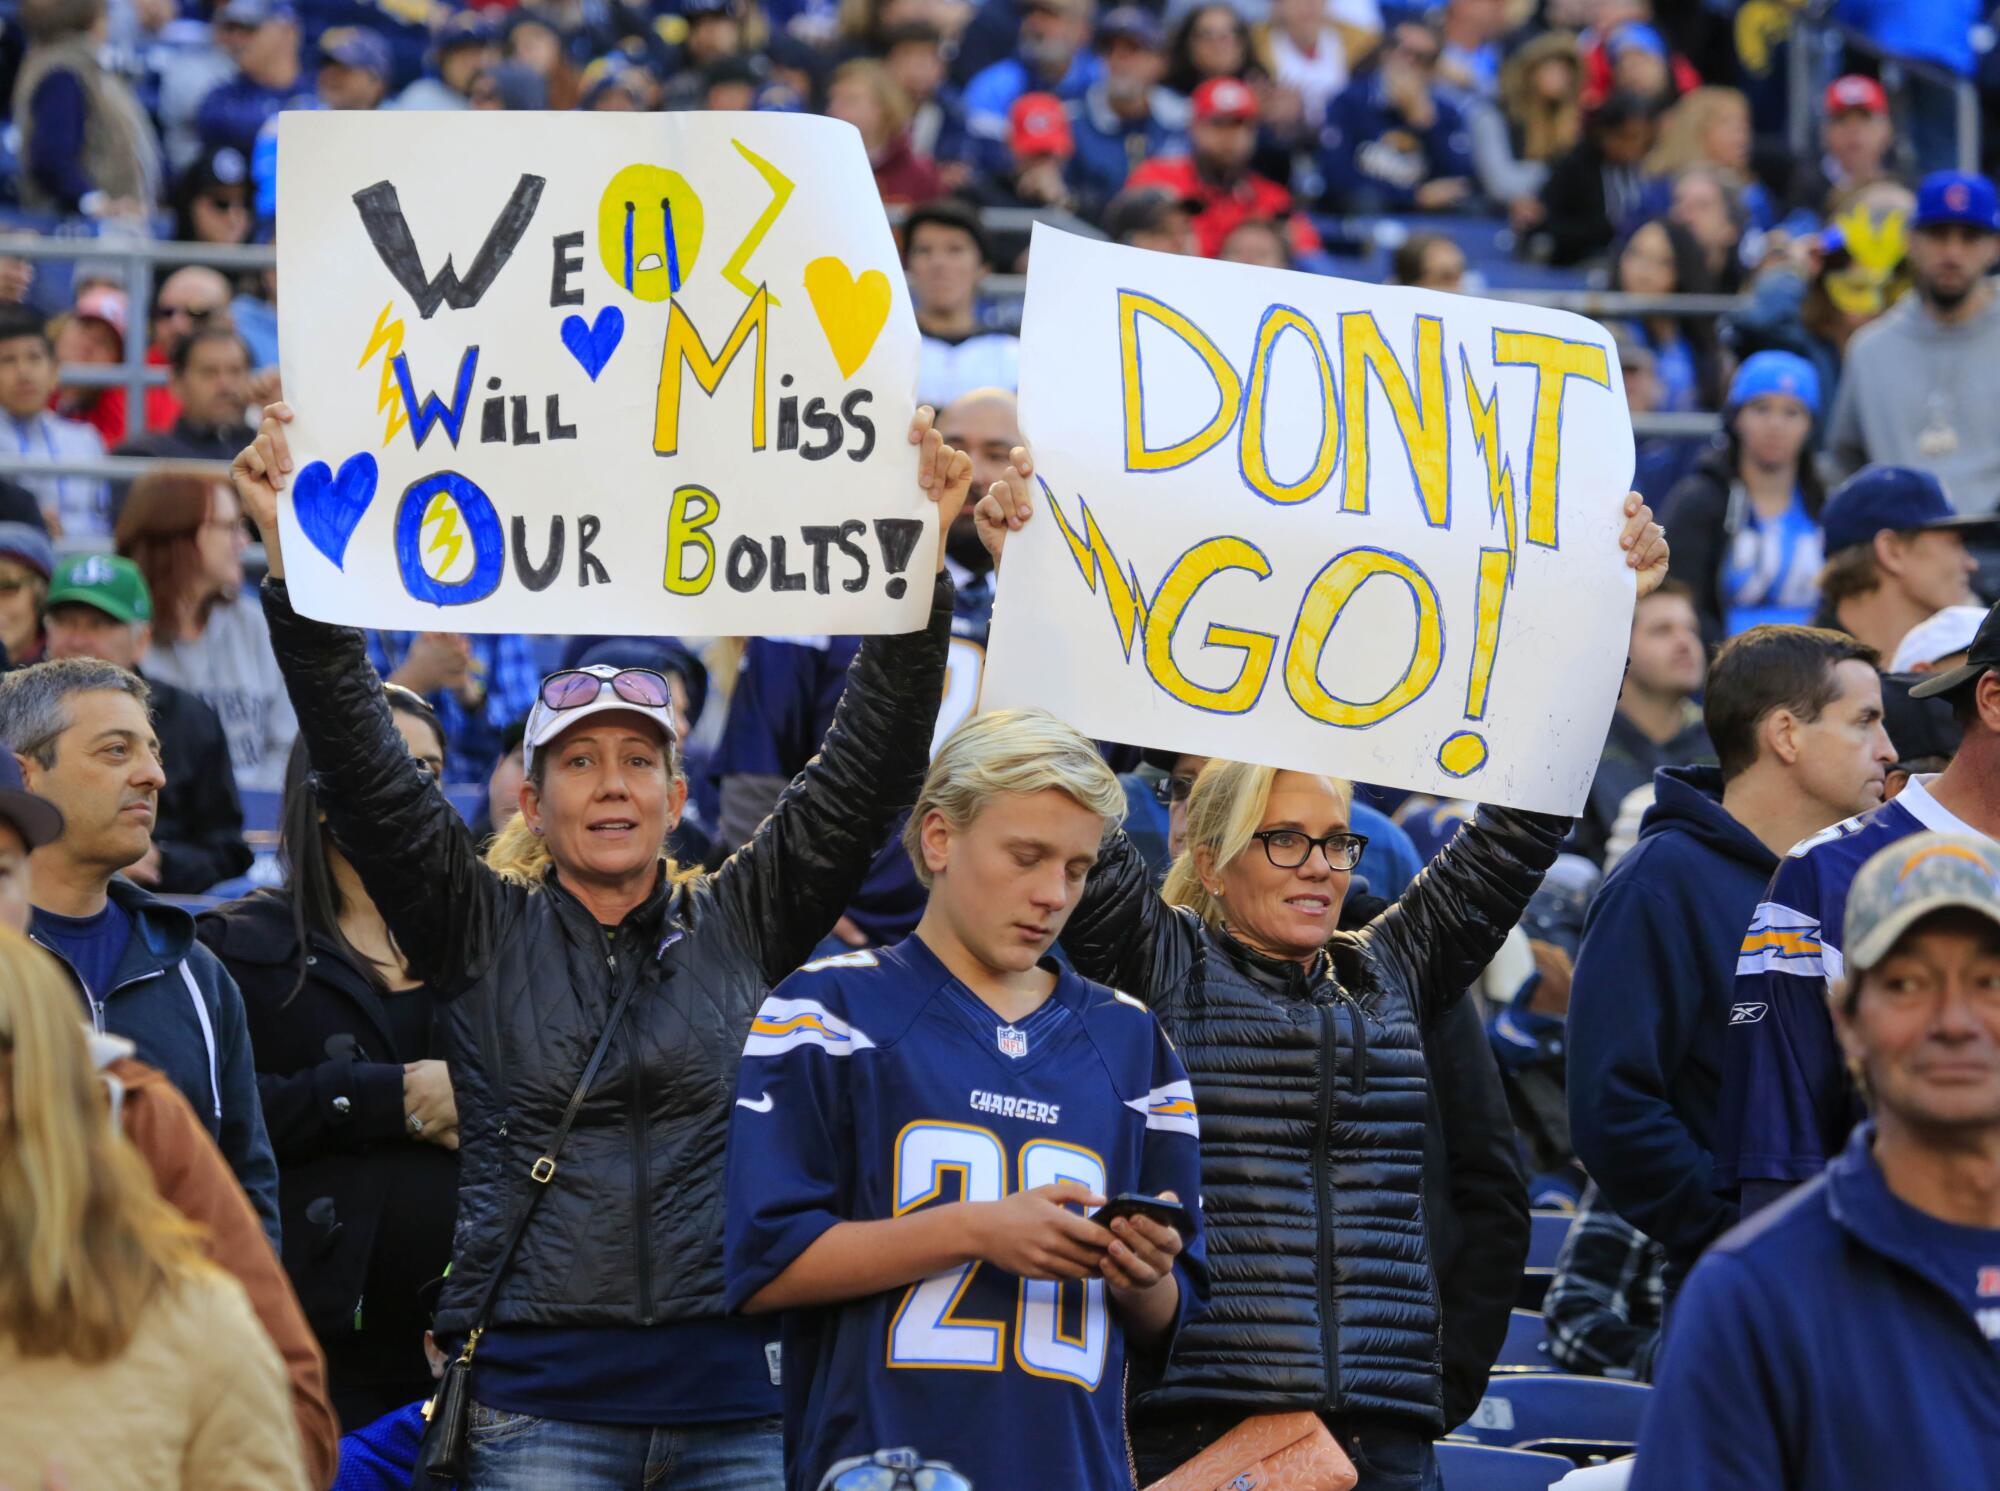 Chargers fans held signs expressing sadness if the team leaves San Diego, and asking them not to go. 